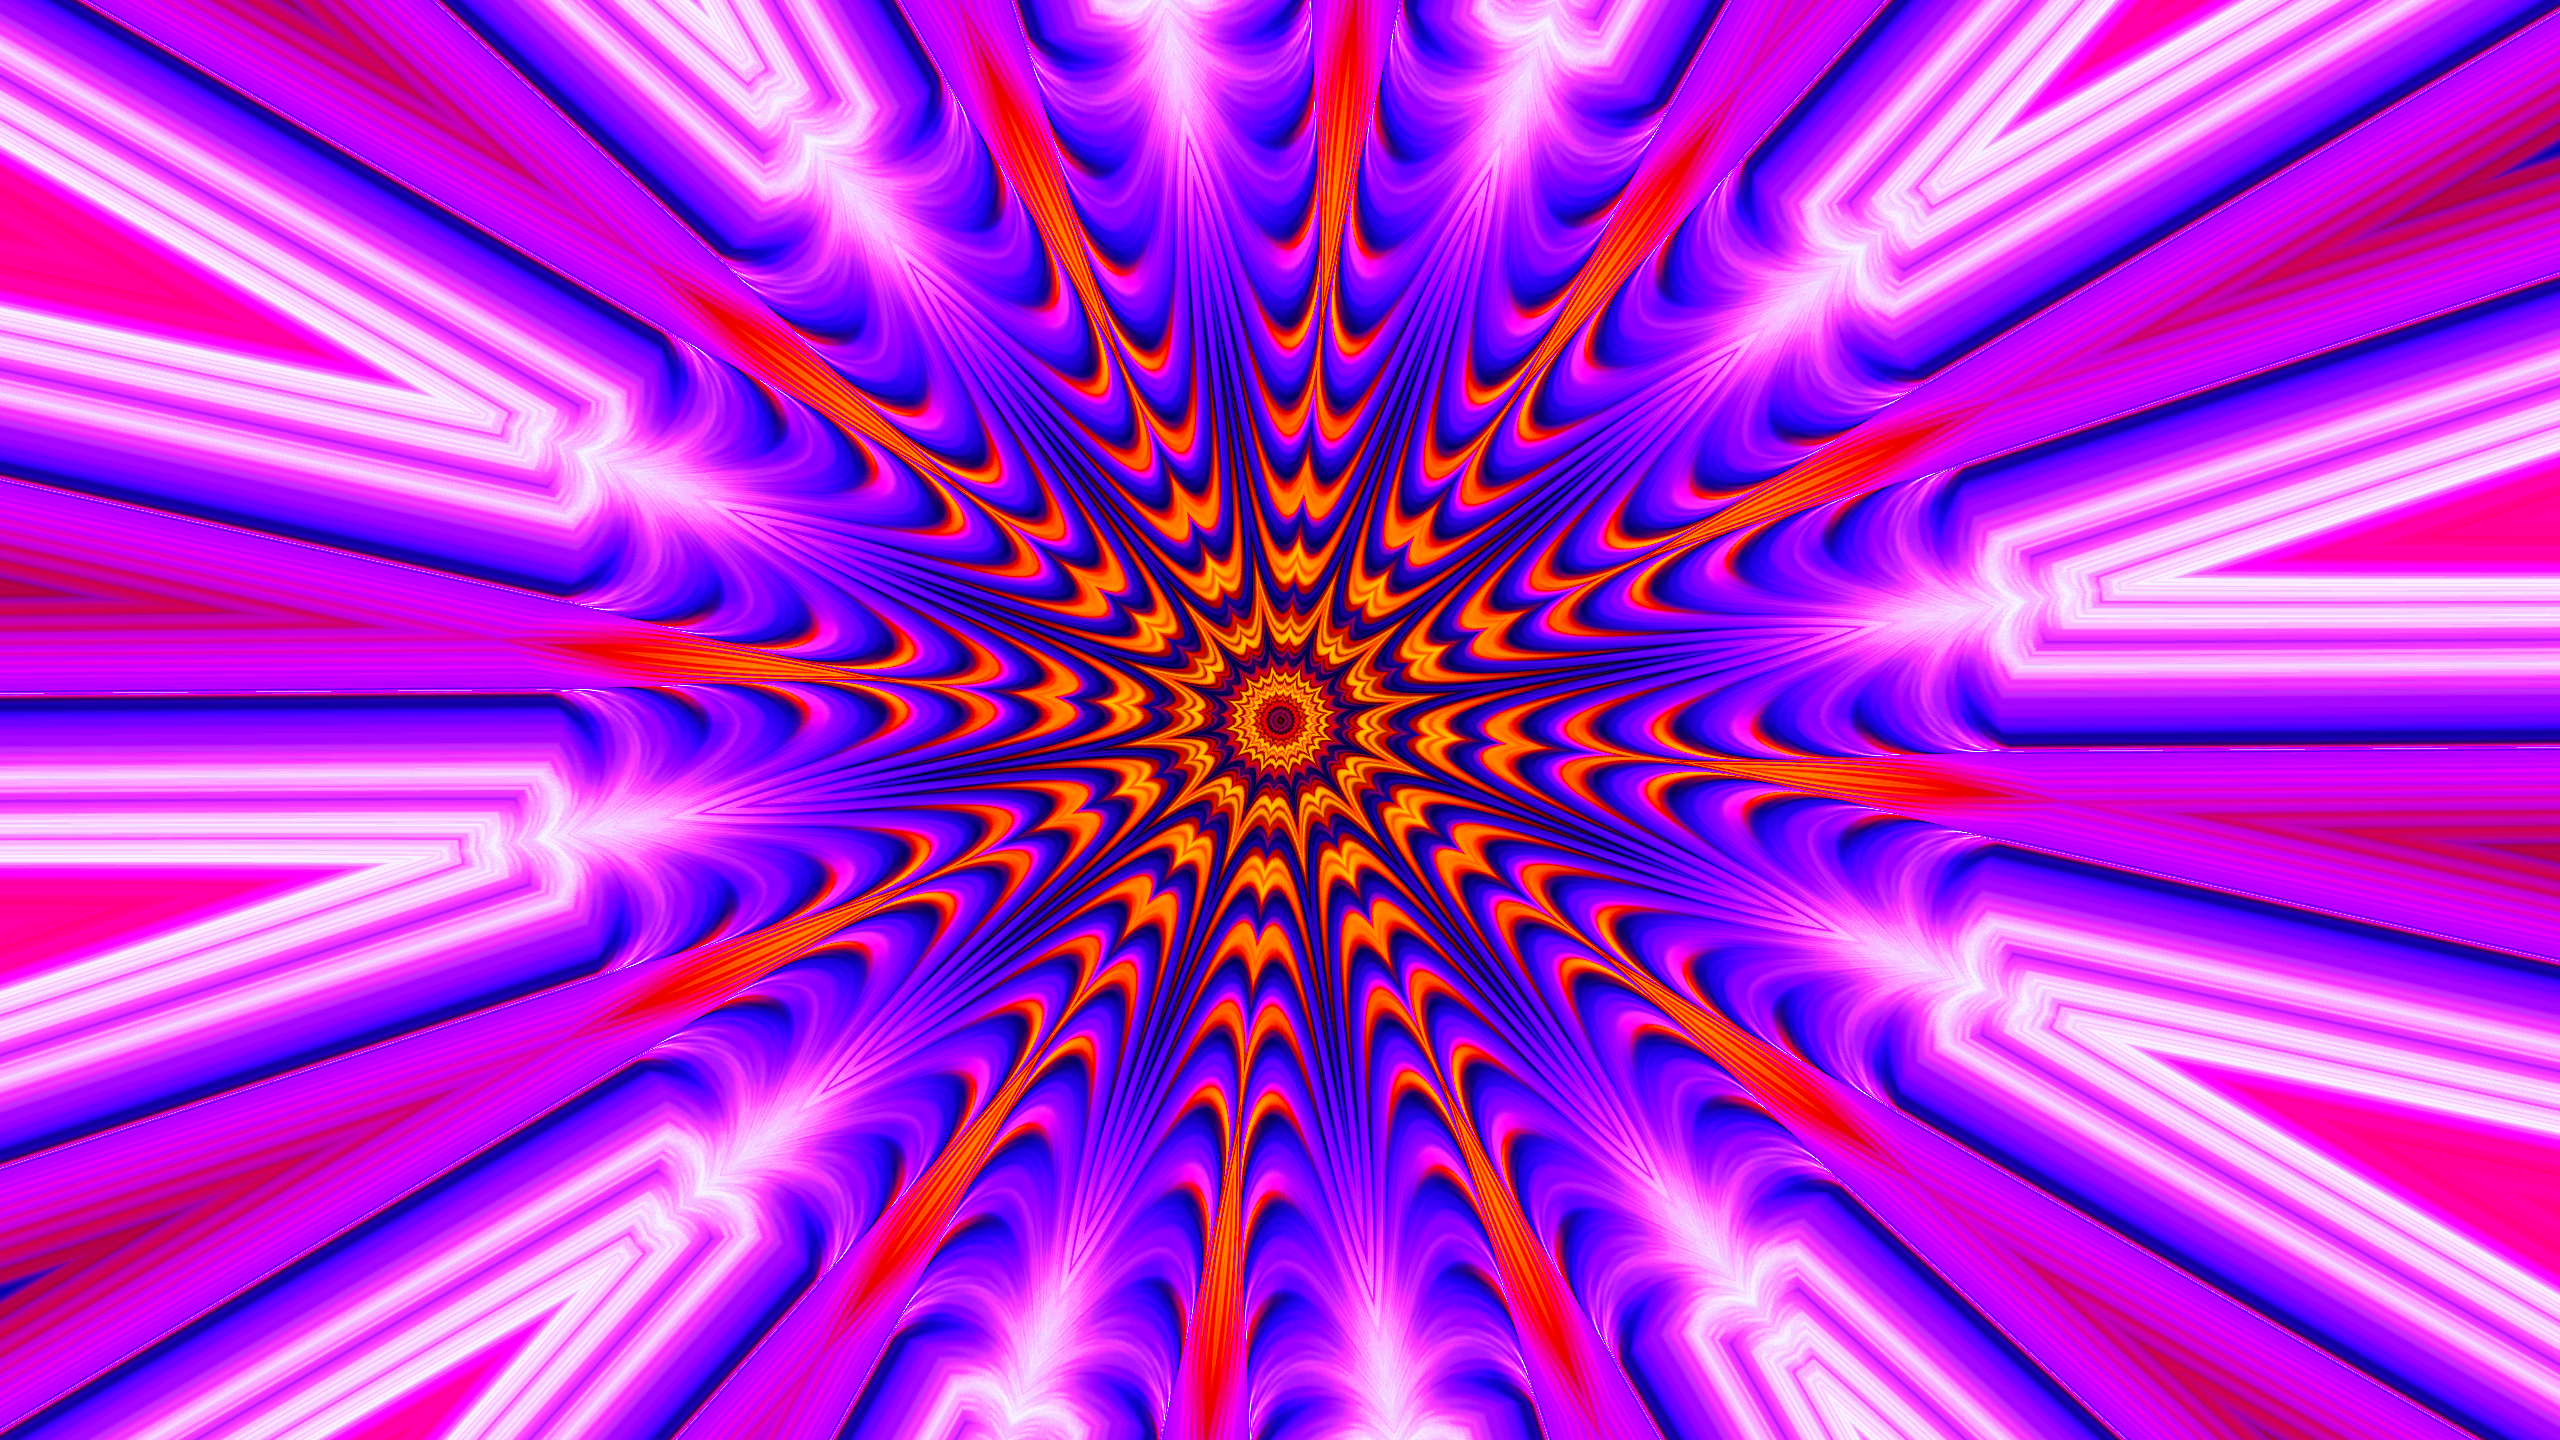 2560x1440 40+ Optical Illusion HD Wallpapers and Backgrounds